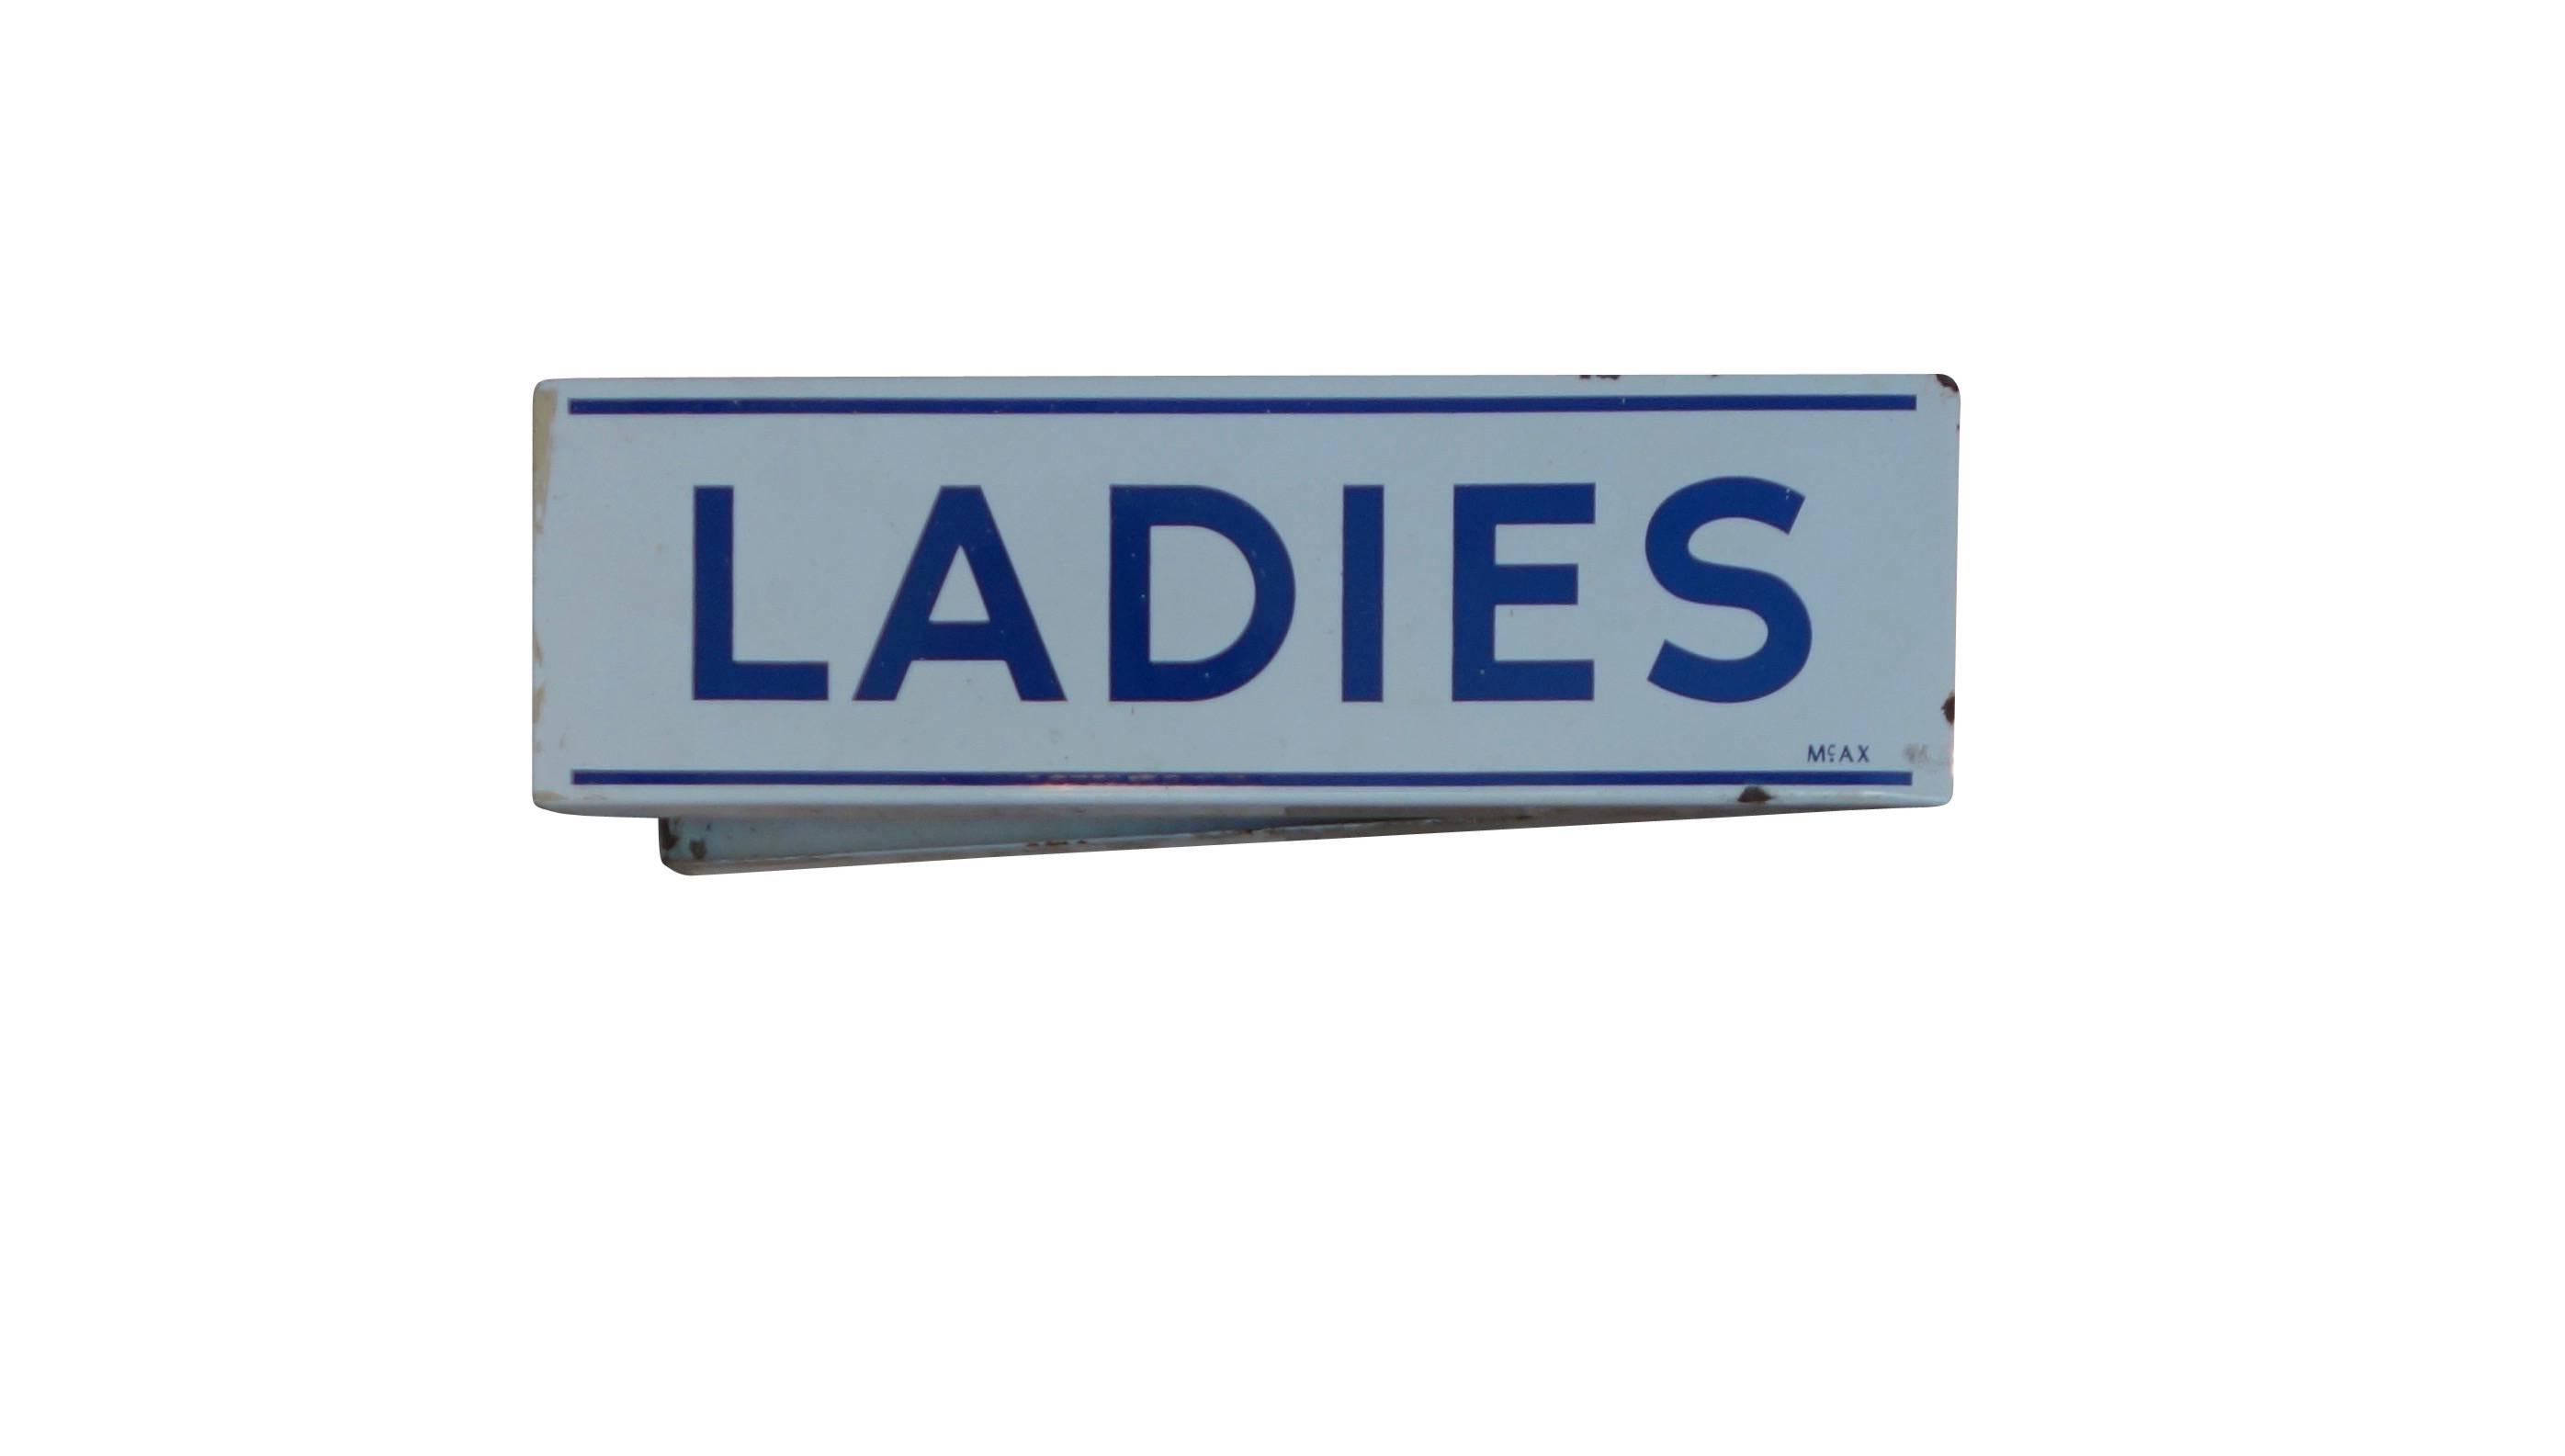 Double Sided Porcelain Enamel Ladies Restroom Sign In Excellent Condition For Sale In Seattle, WA